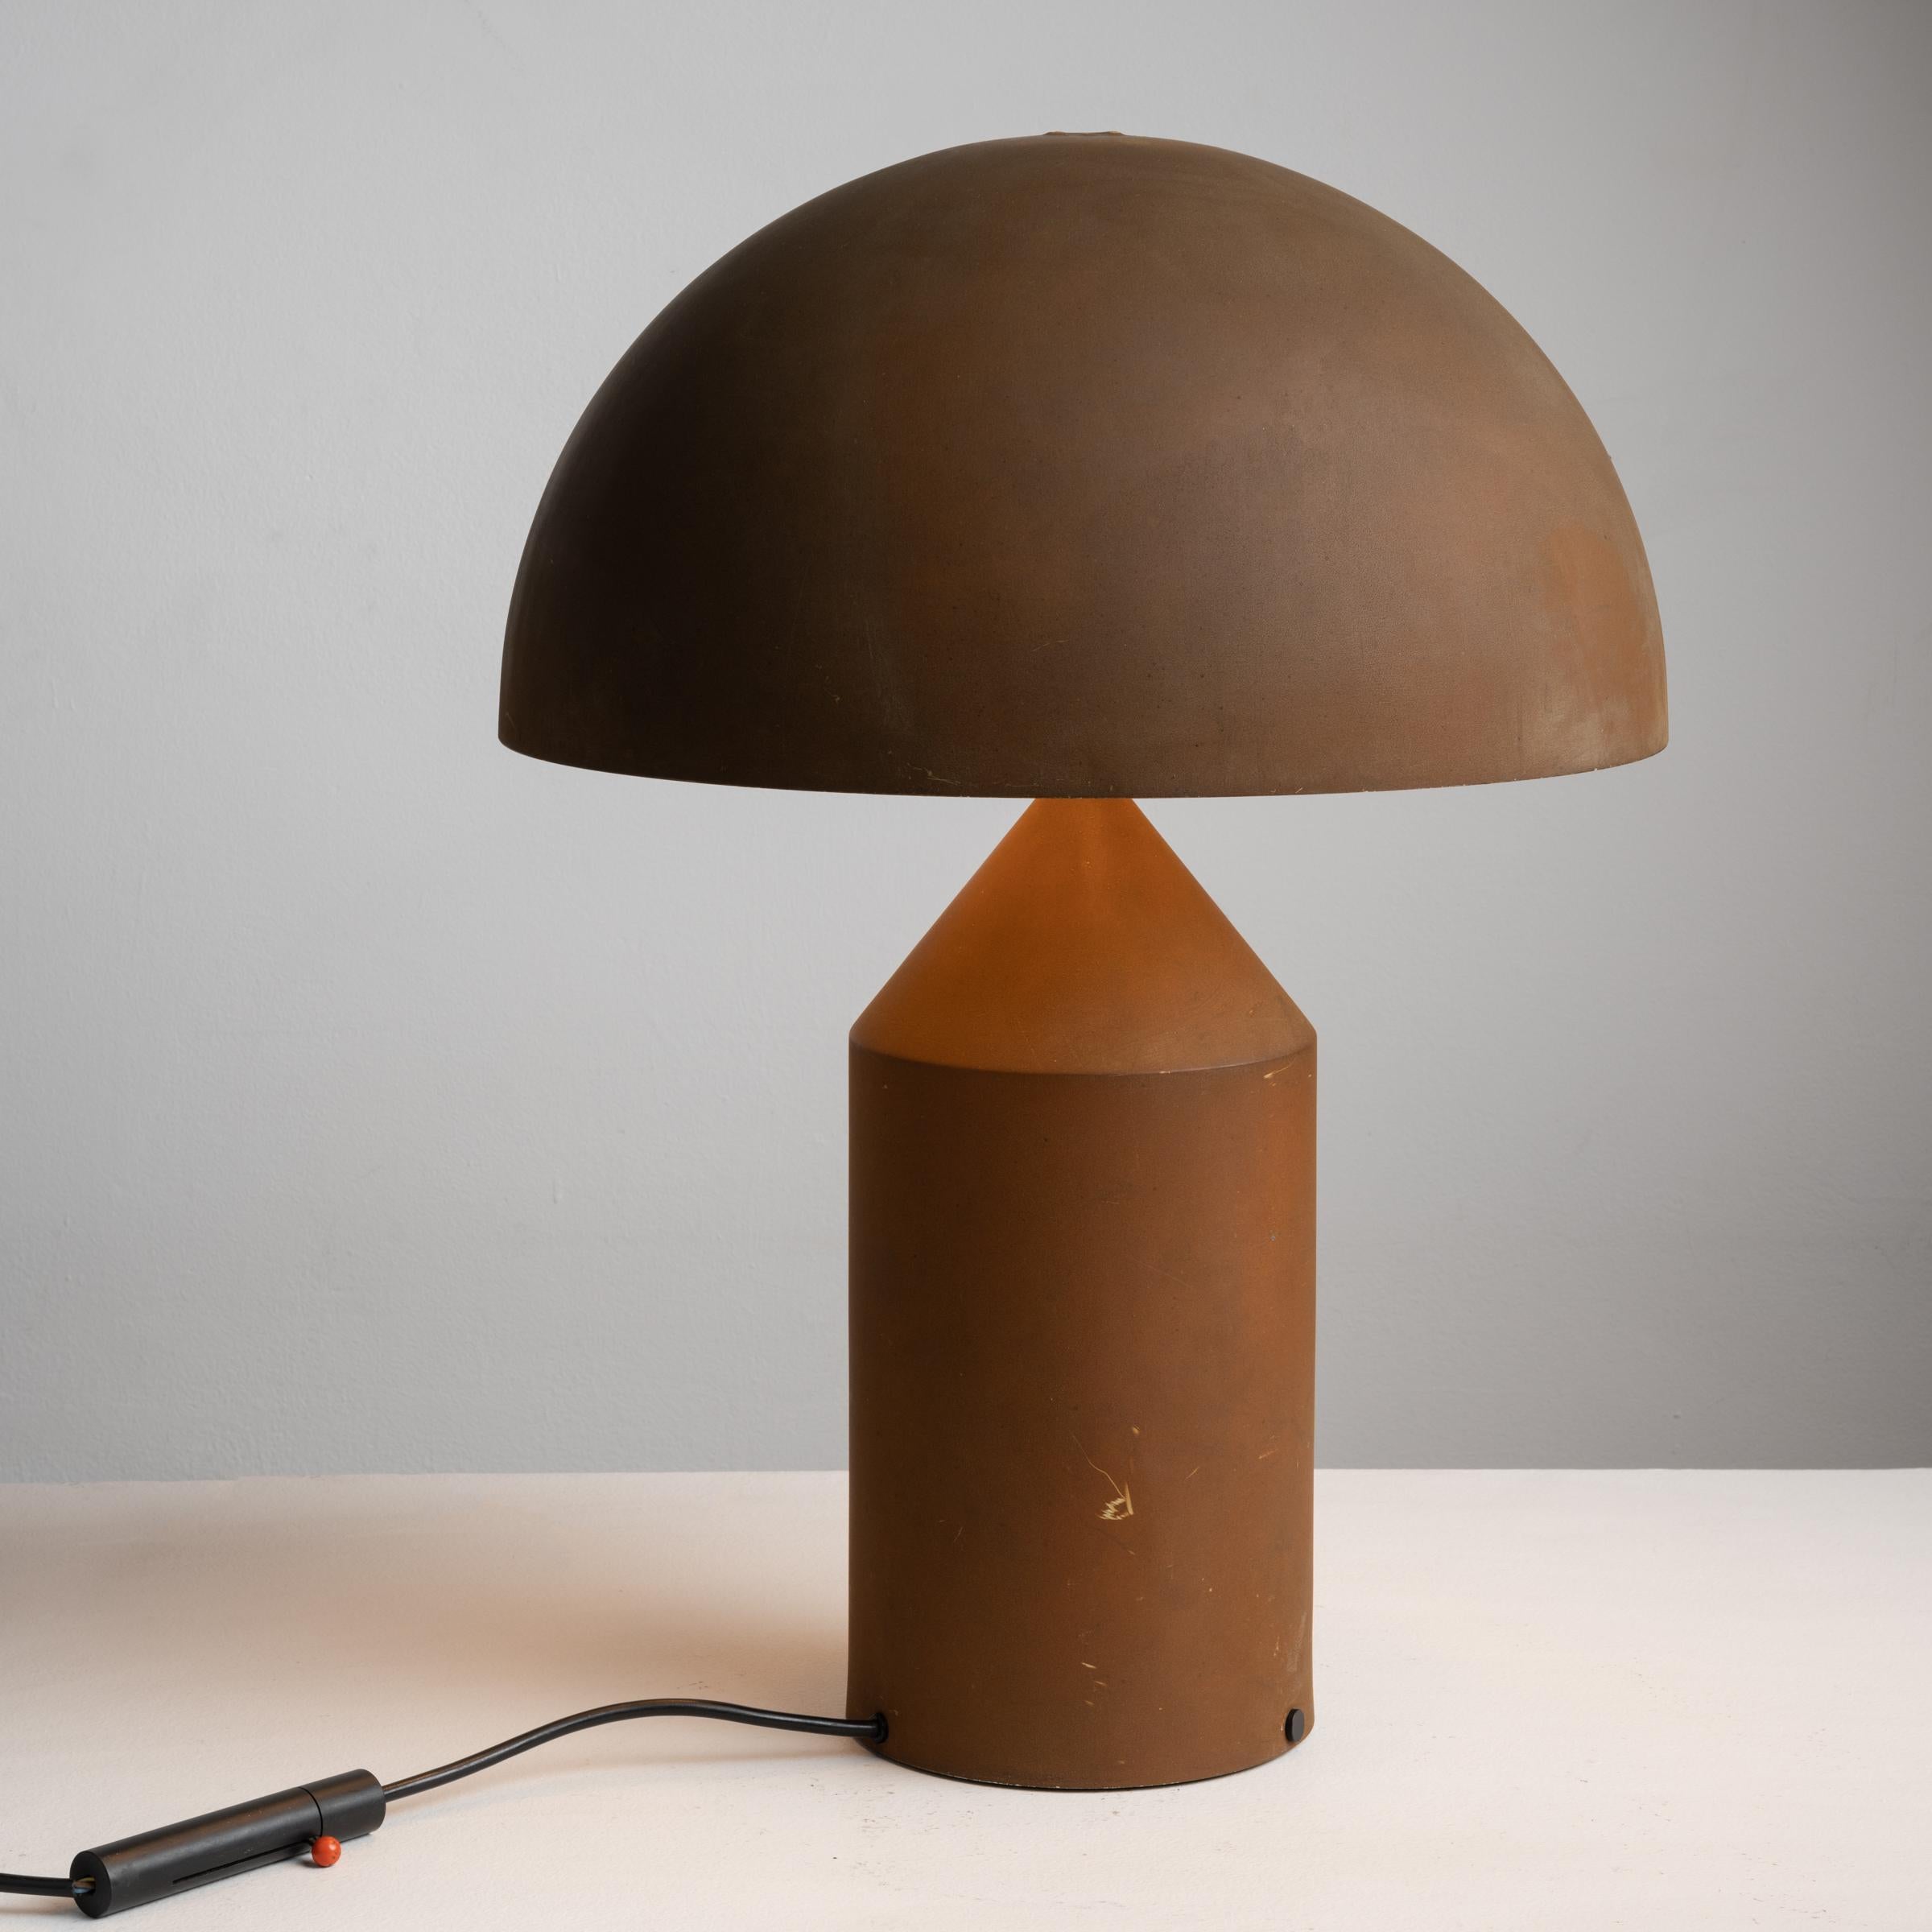 Late 20th Century Atollo 239 Table Lamp by Vico Magistretti for Oluce